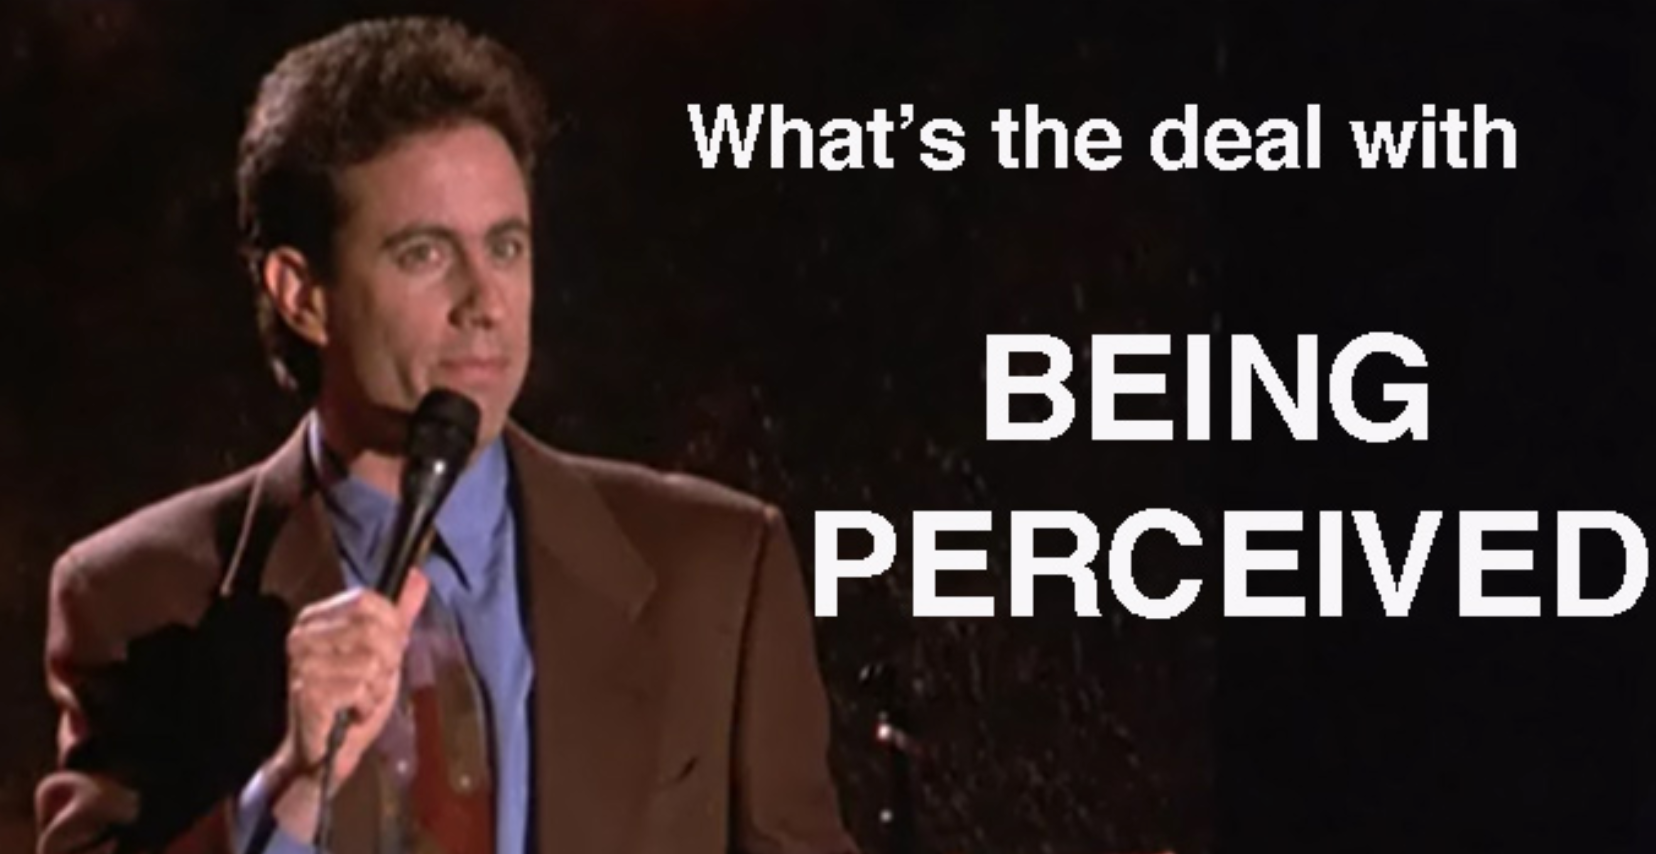 Jerry Seinfeld doing standup with the words "what's the deal with being perceived"